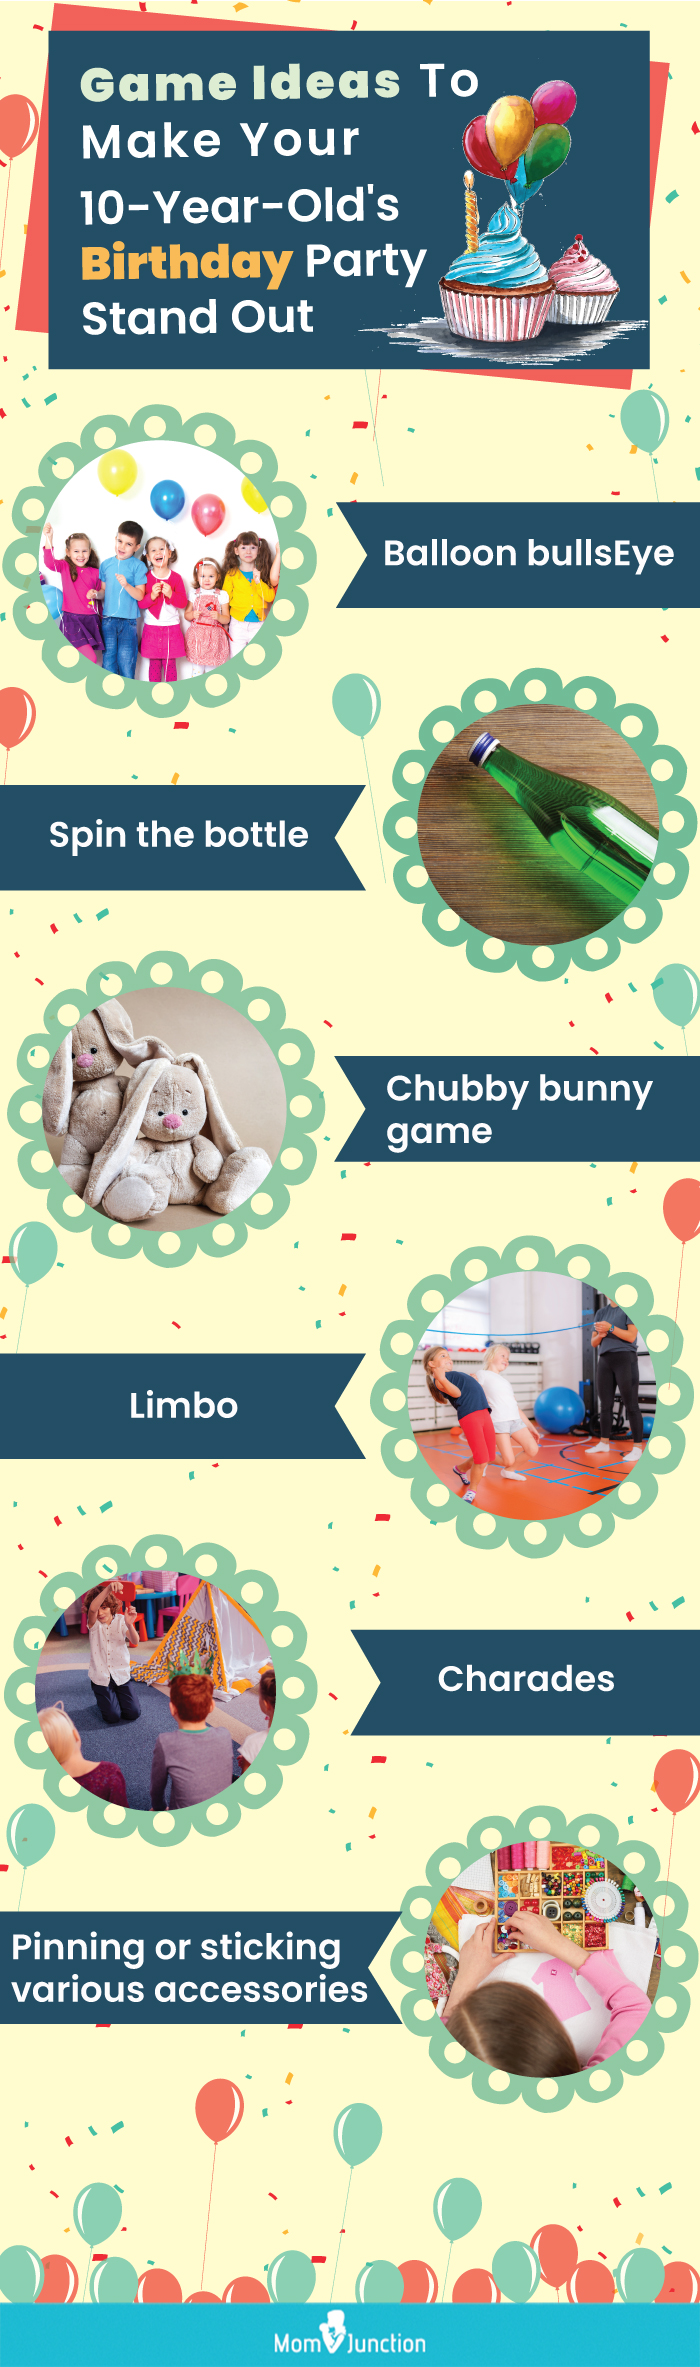 10 year olds' birthday party games (infographic)